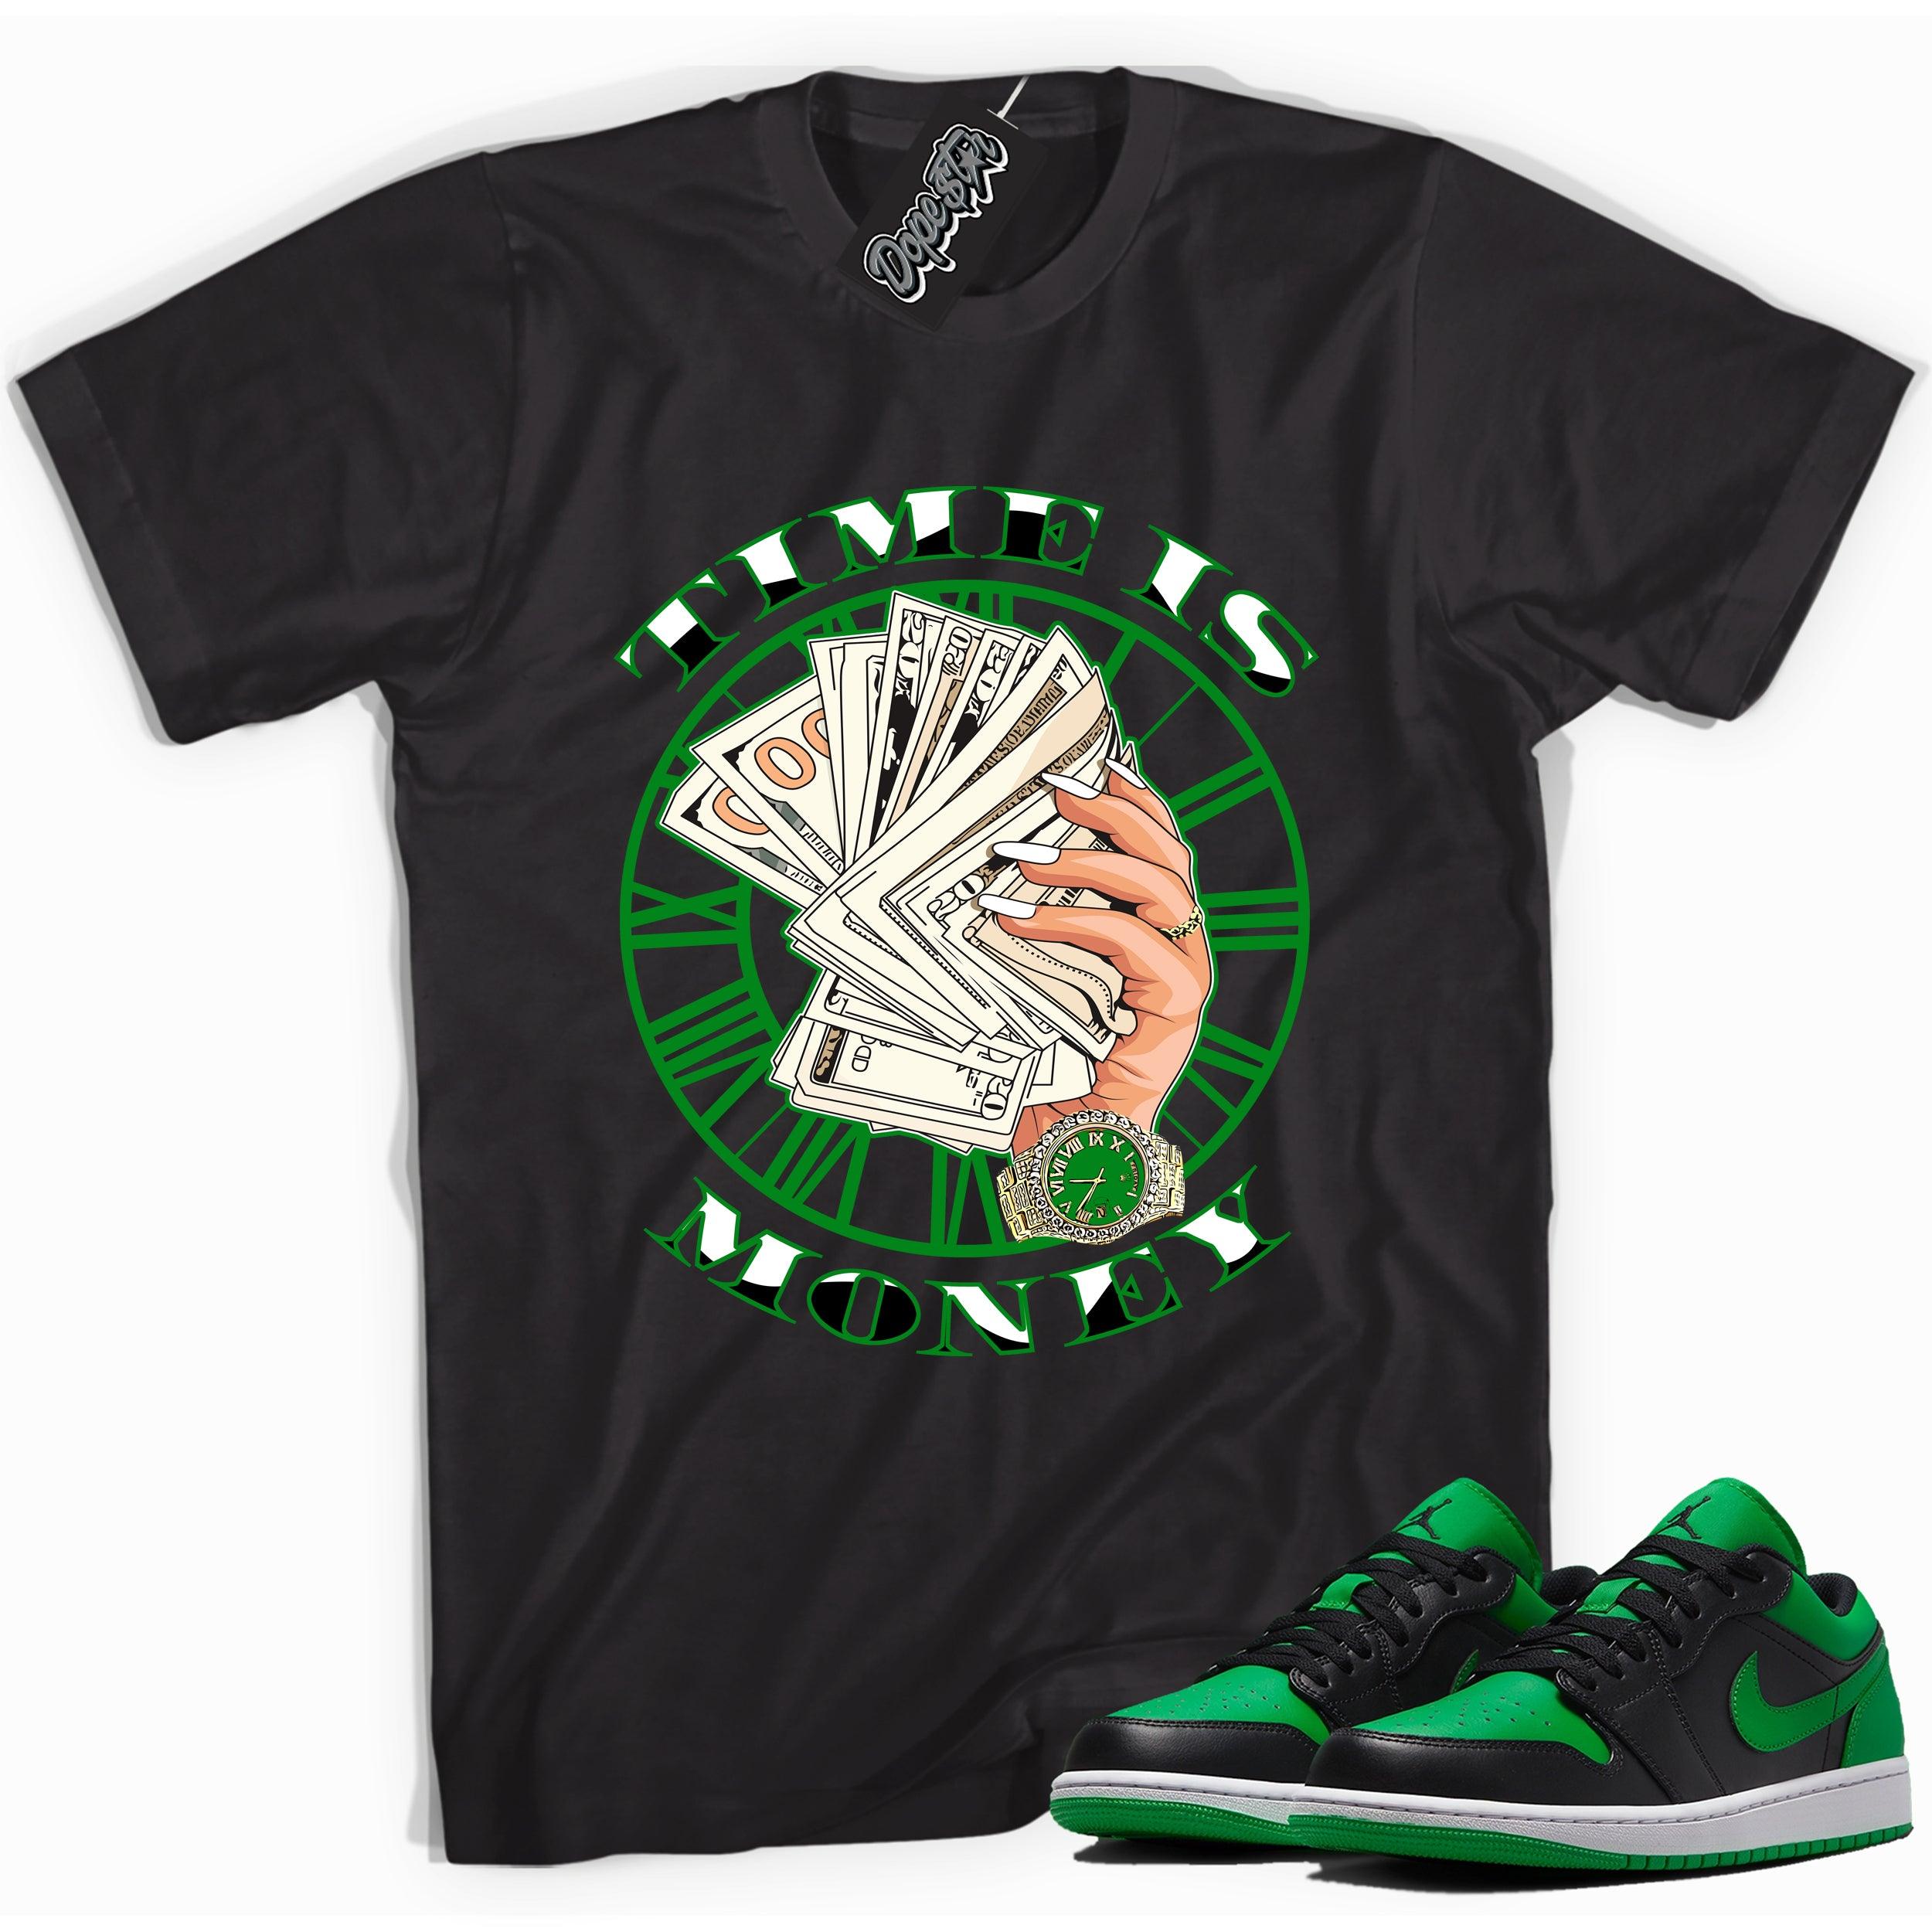 Cool black graphic tee with 'time is money' print, that perfectly matches Air Jordan 1 Low Lucky Green sneakers